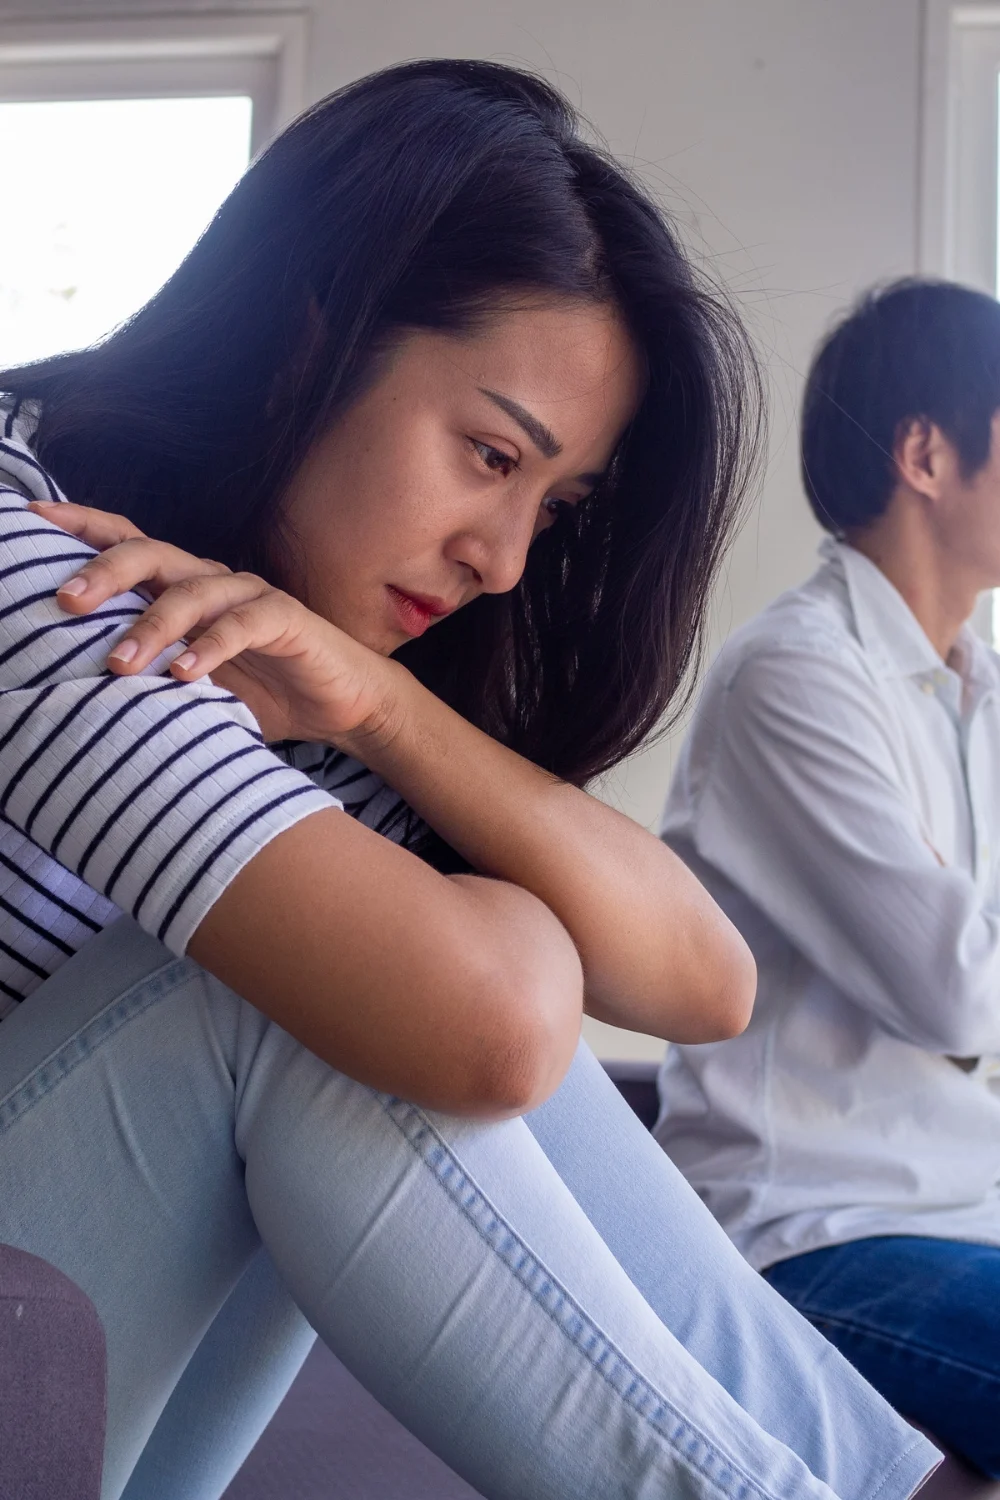 10 Evident Signs He Doesn't Treat You Right